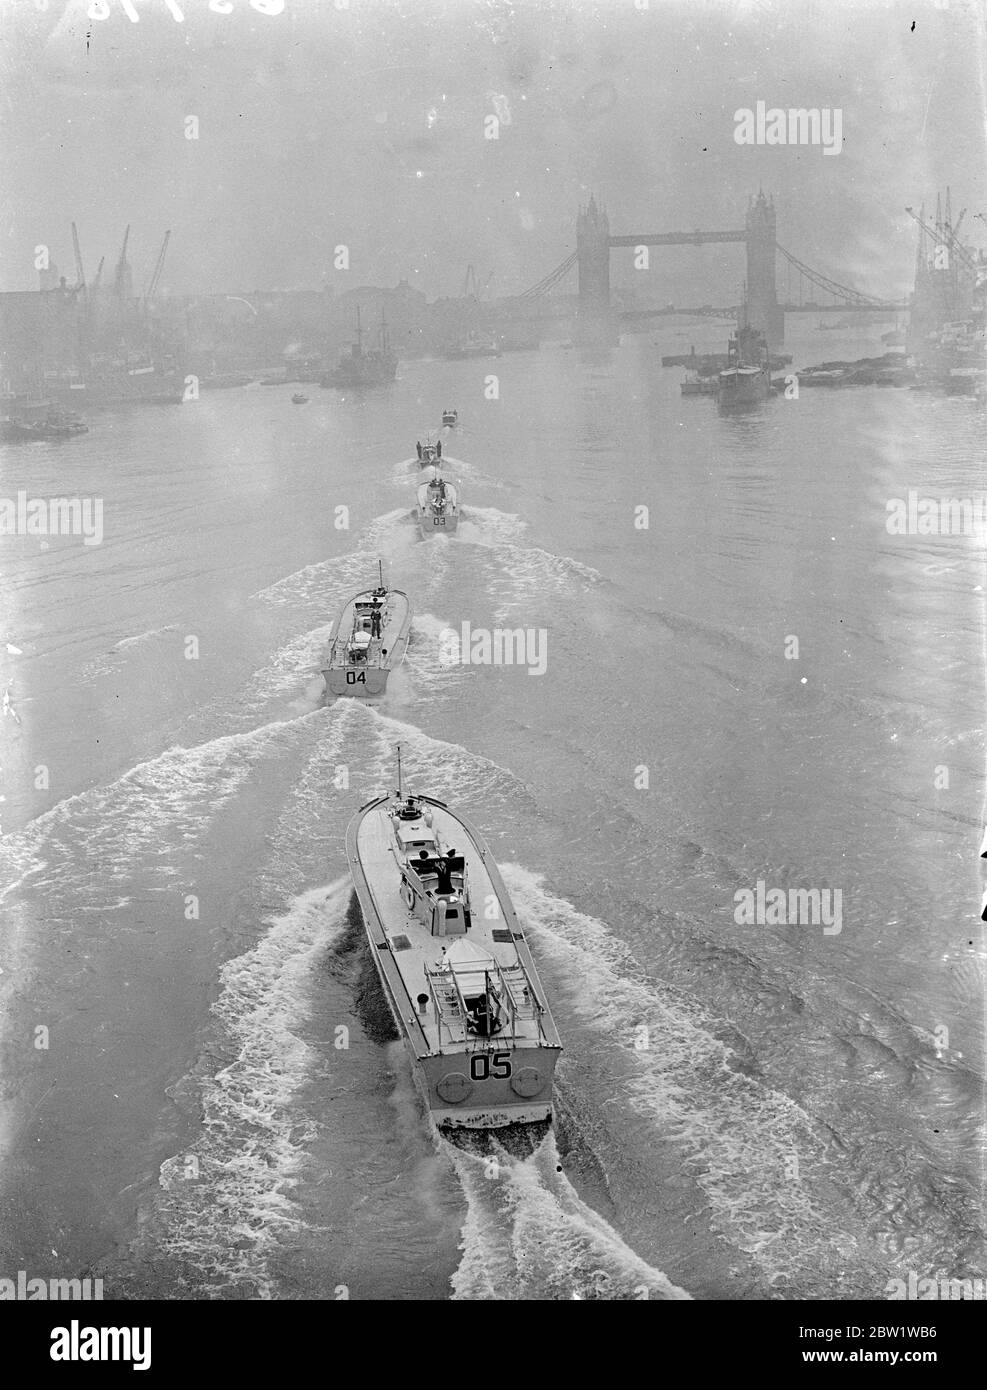 Royal barge leads rehearsal of Kings River trip. Rehearsal took place on the Thames for the King's trip from Westminster to Greenwich next Tuesday when he will open the new National Maritime Museum. The Kings barge was in the lead. Photo shows, the Kings barge heading the procession through the Paul of London with Tower Bridge in the background. 24 April 1937 Stock Photo